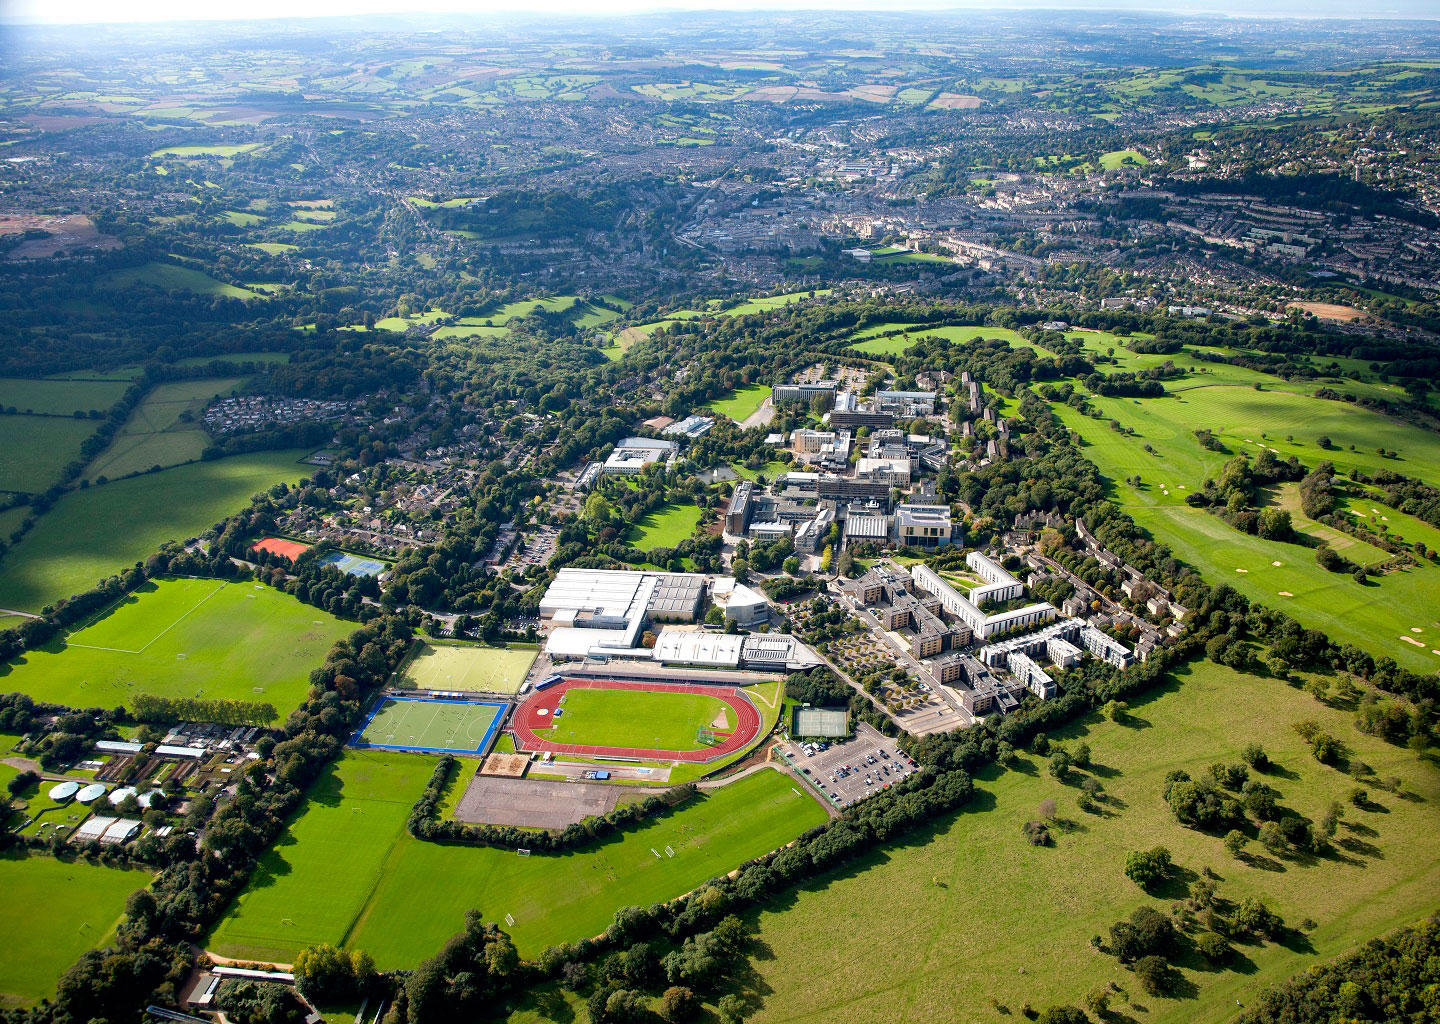 University of Bath, UK Ranking, Reviews, Courses, Tuition Fees